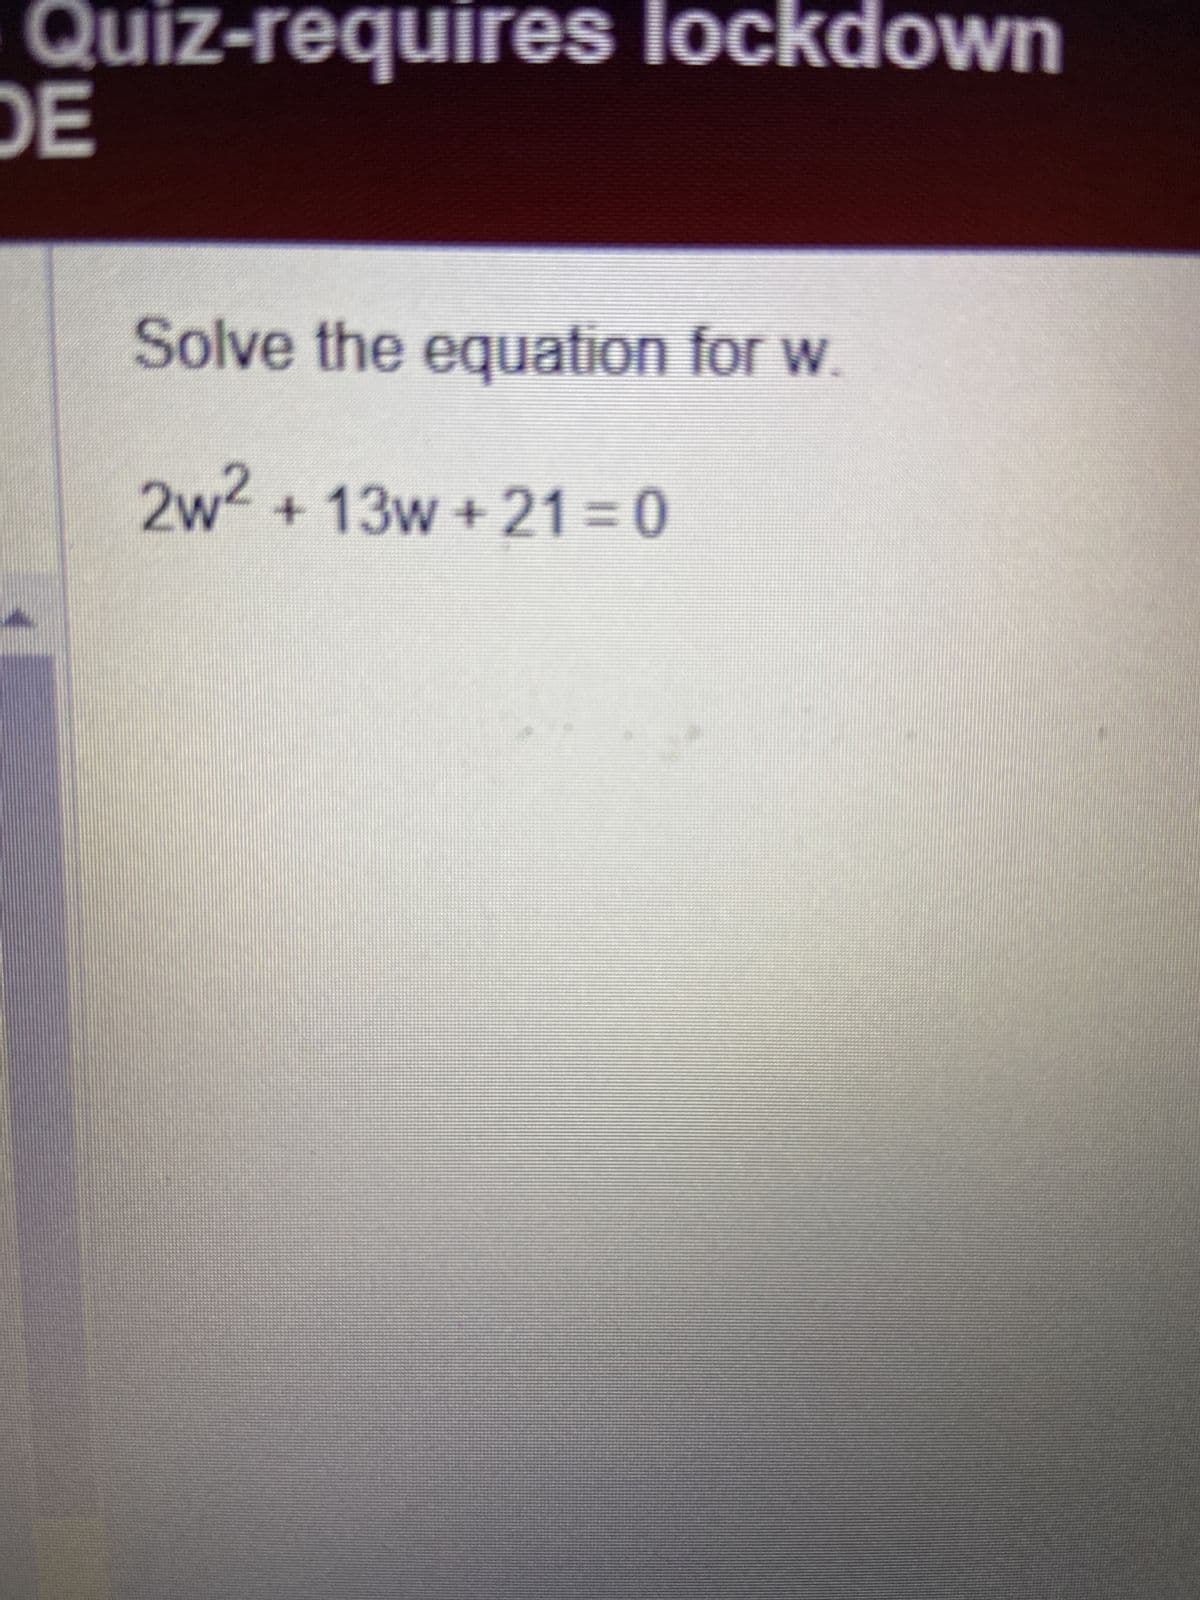 Quiz-requires lockdown
DE
Solve the equation for w.
2w² + 13w+21=0